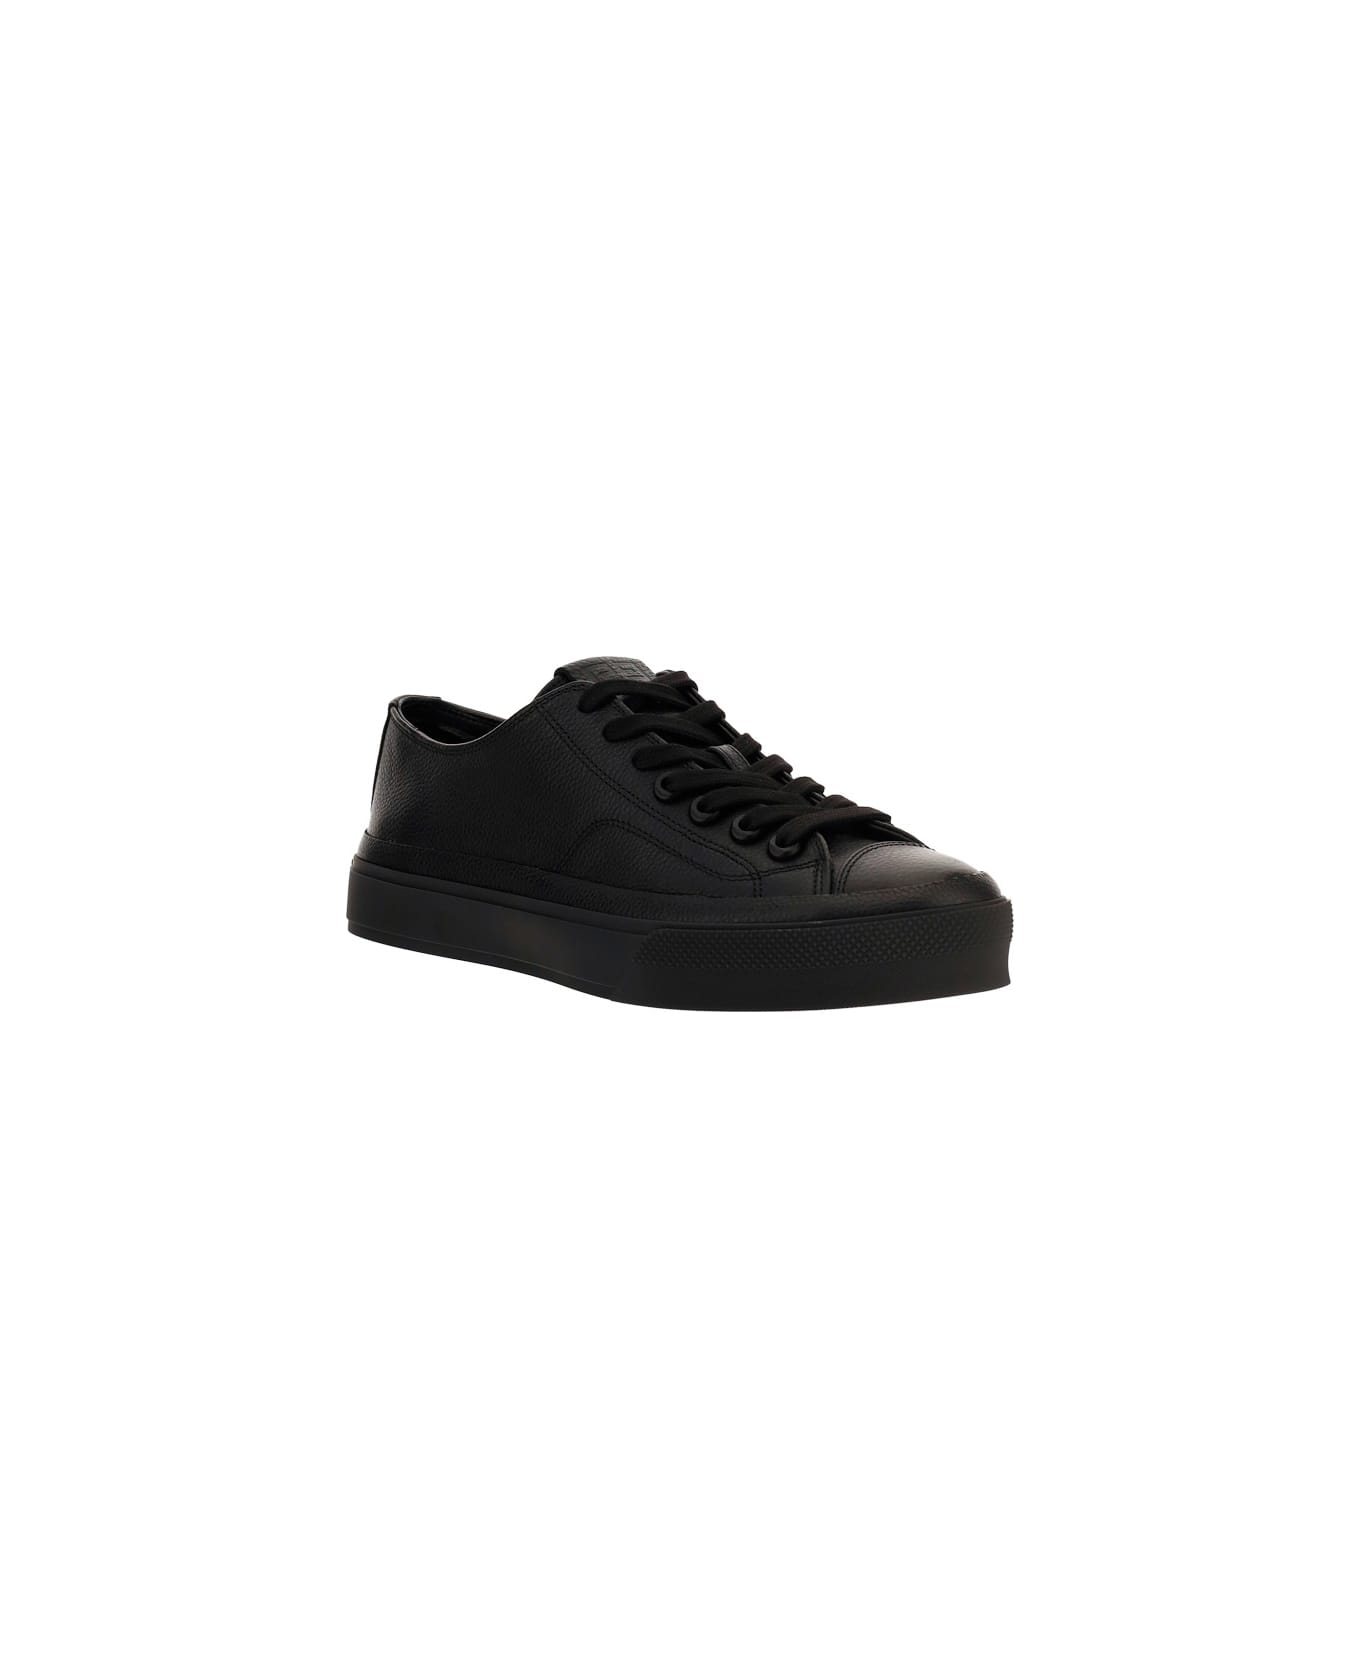 Givenchy City Low Sneakers